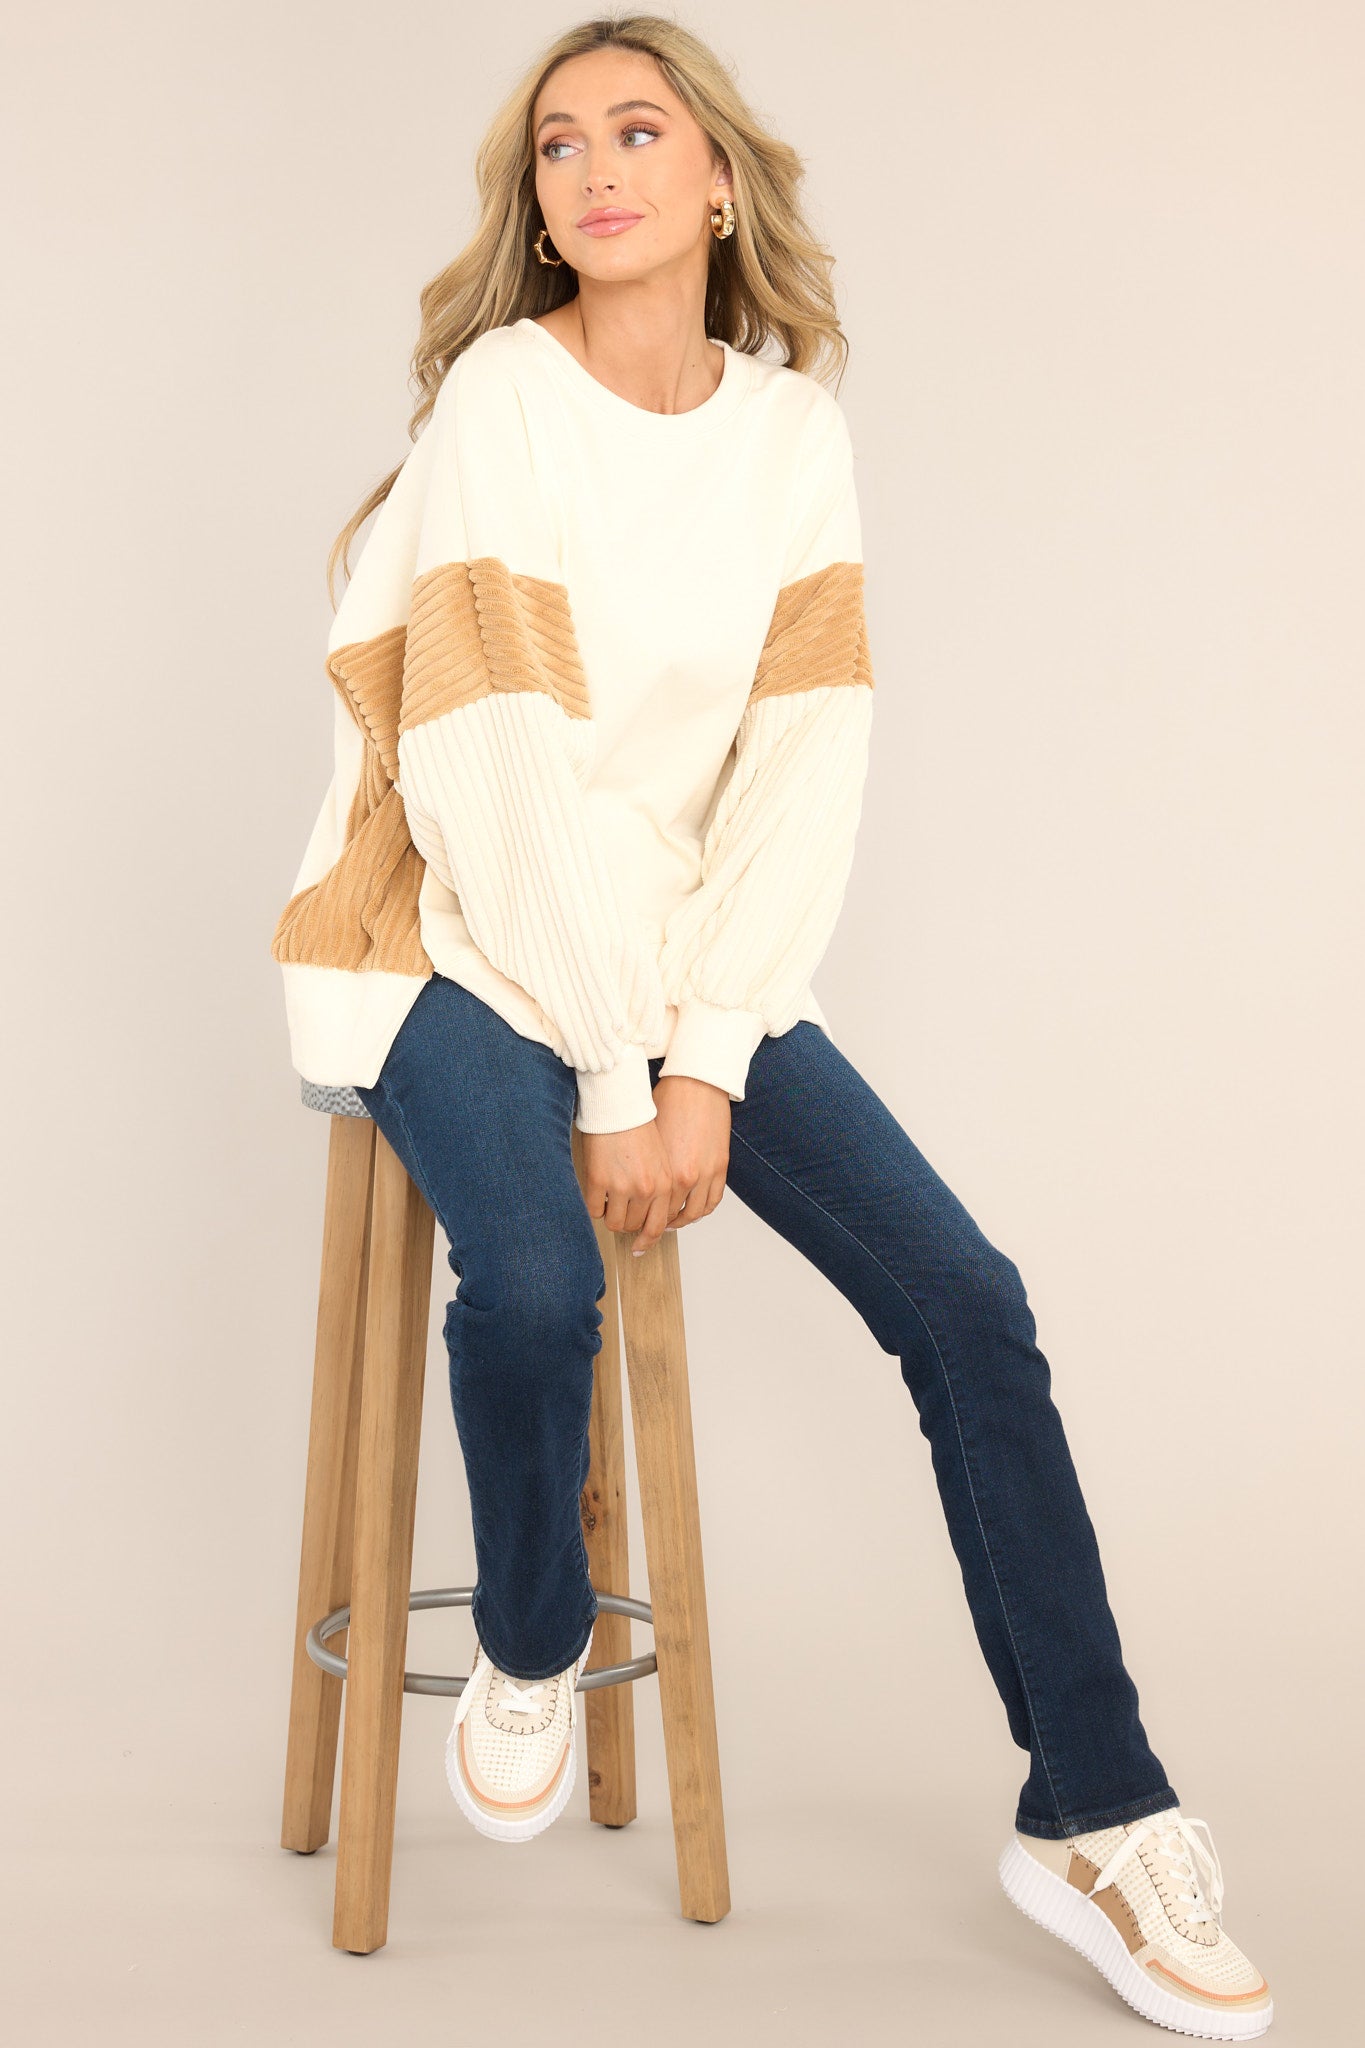 This ivory sweatshirt features a ribbed crew neckline, soft & textured detailing on the sleeves and sides, and a split hemline.